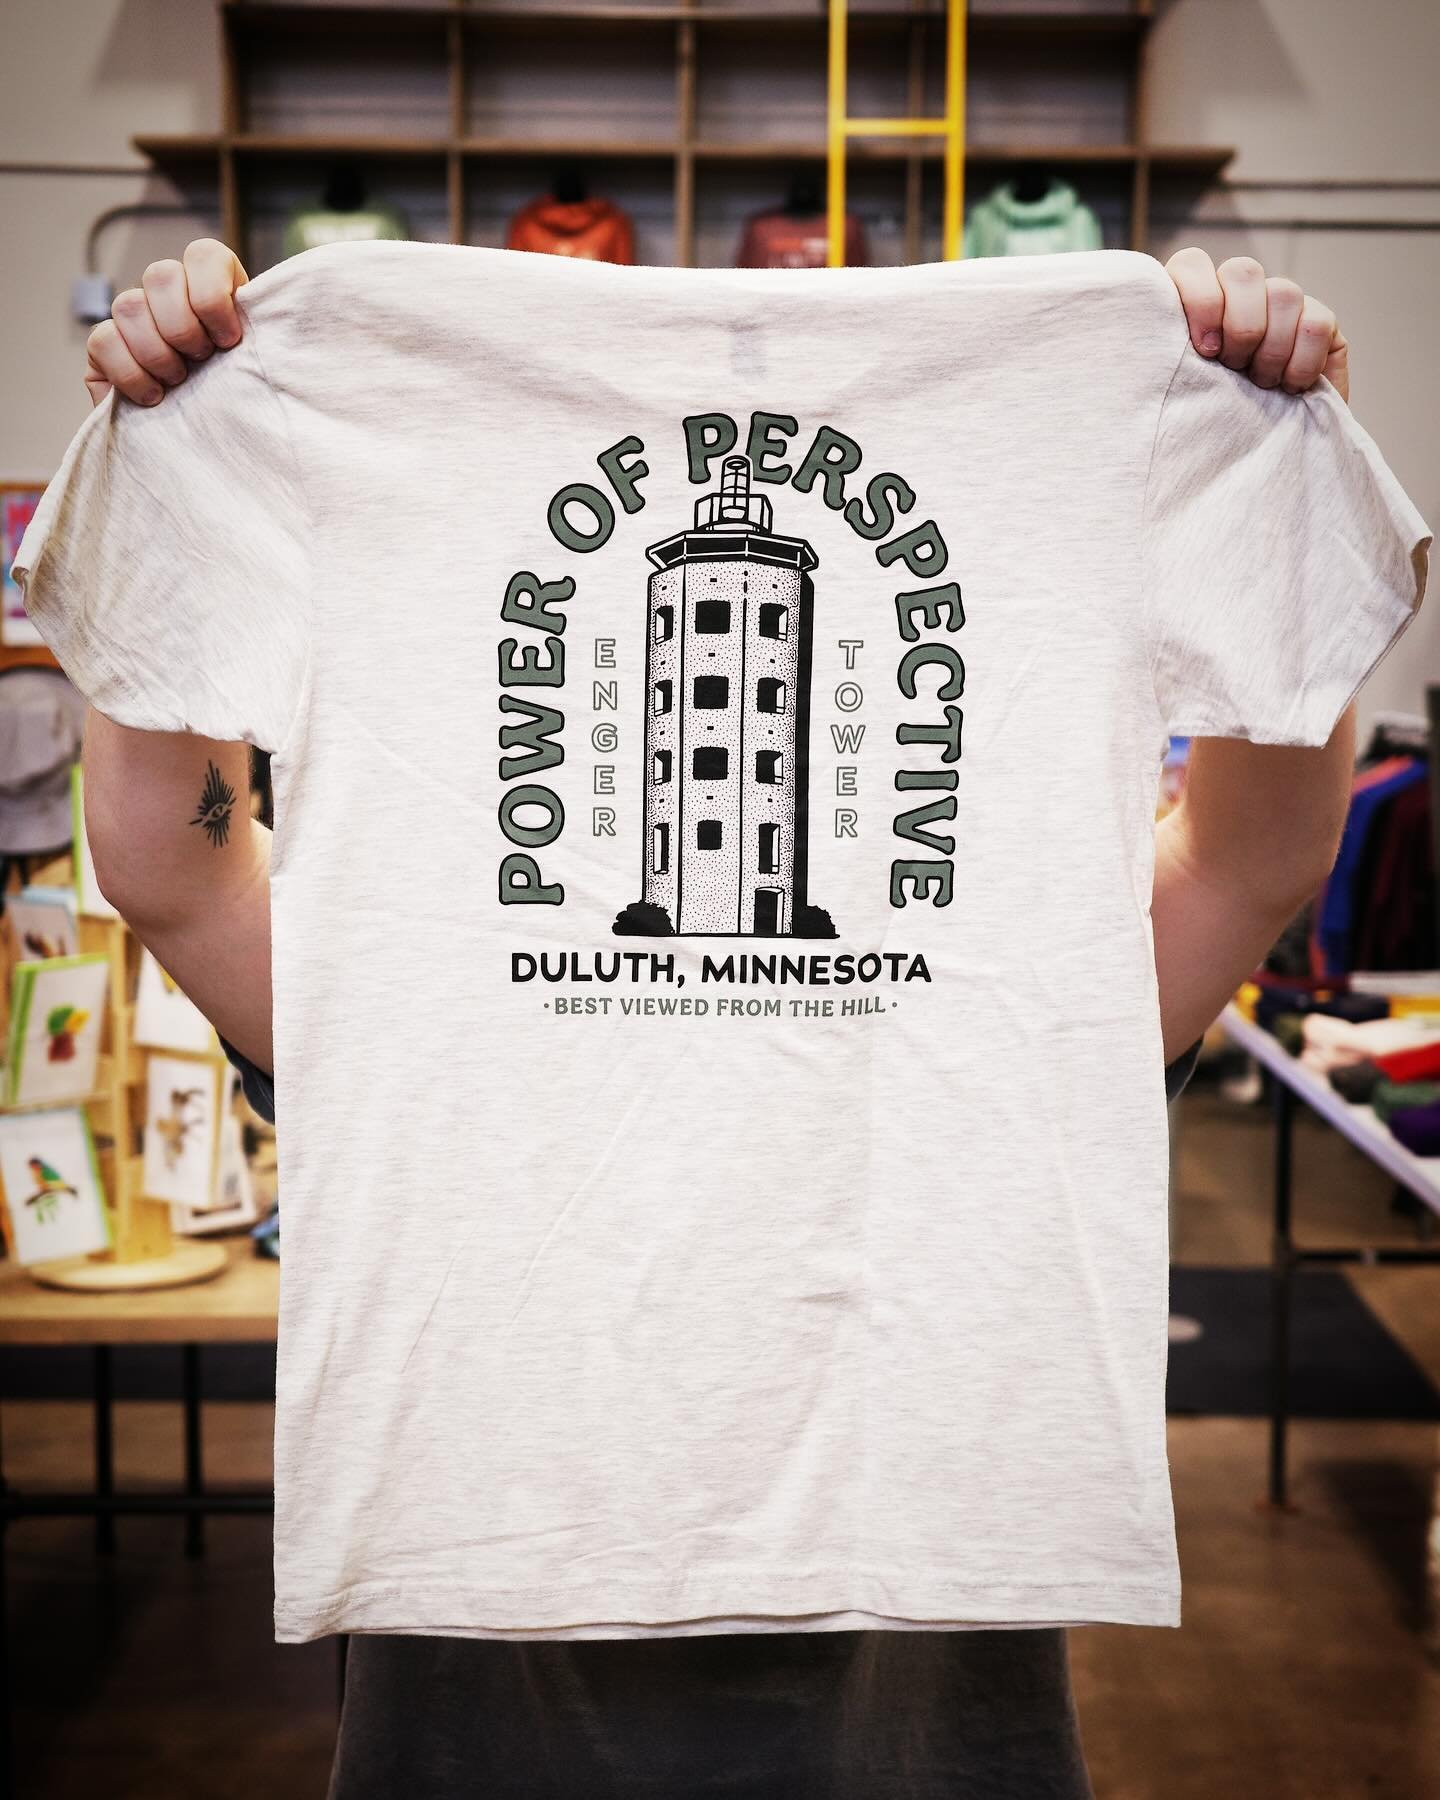 📈 POWER OF PERSPECTIVE 👀
&bull;
NEW ARRIVALS are starting to hit the shelves! This one is giving our Enger Tower some real love, featuring design work from our company pal, Sean. Available very soon, in limited quantities both in-store and online! 